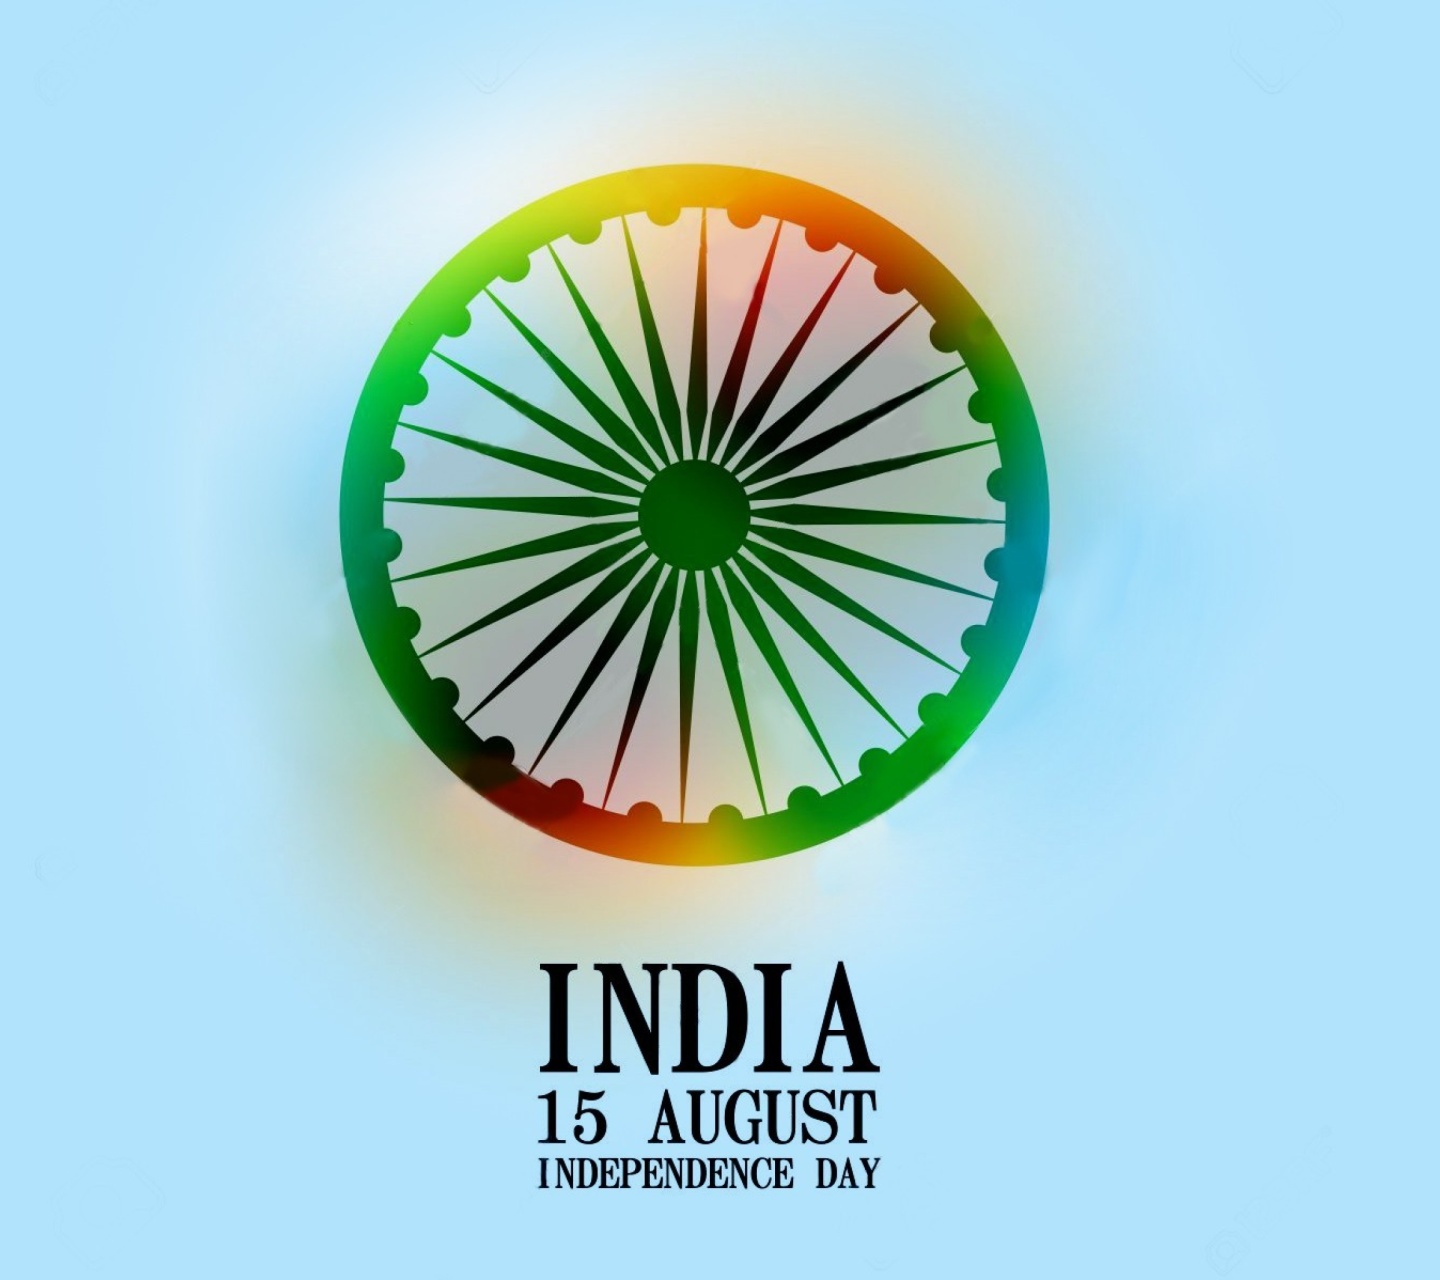 Sfondi India Independence Day 15 August 1440x1280